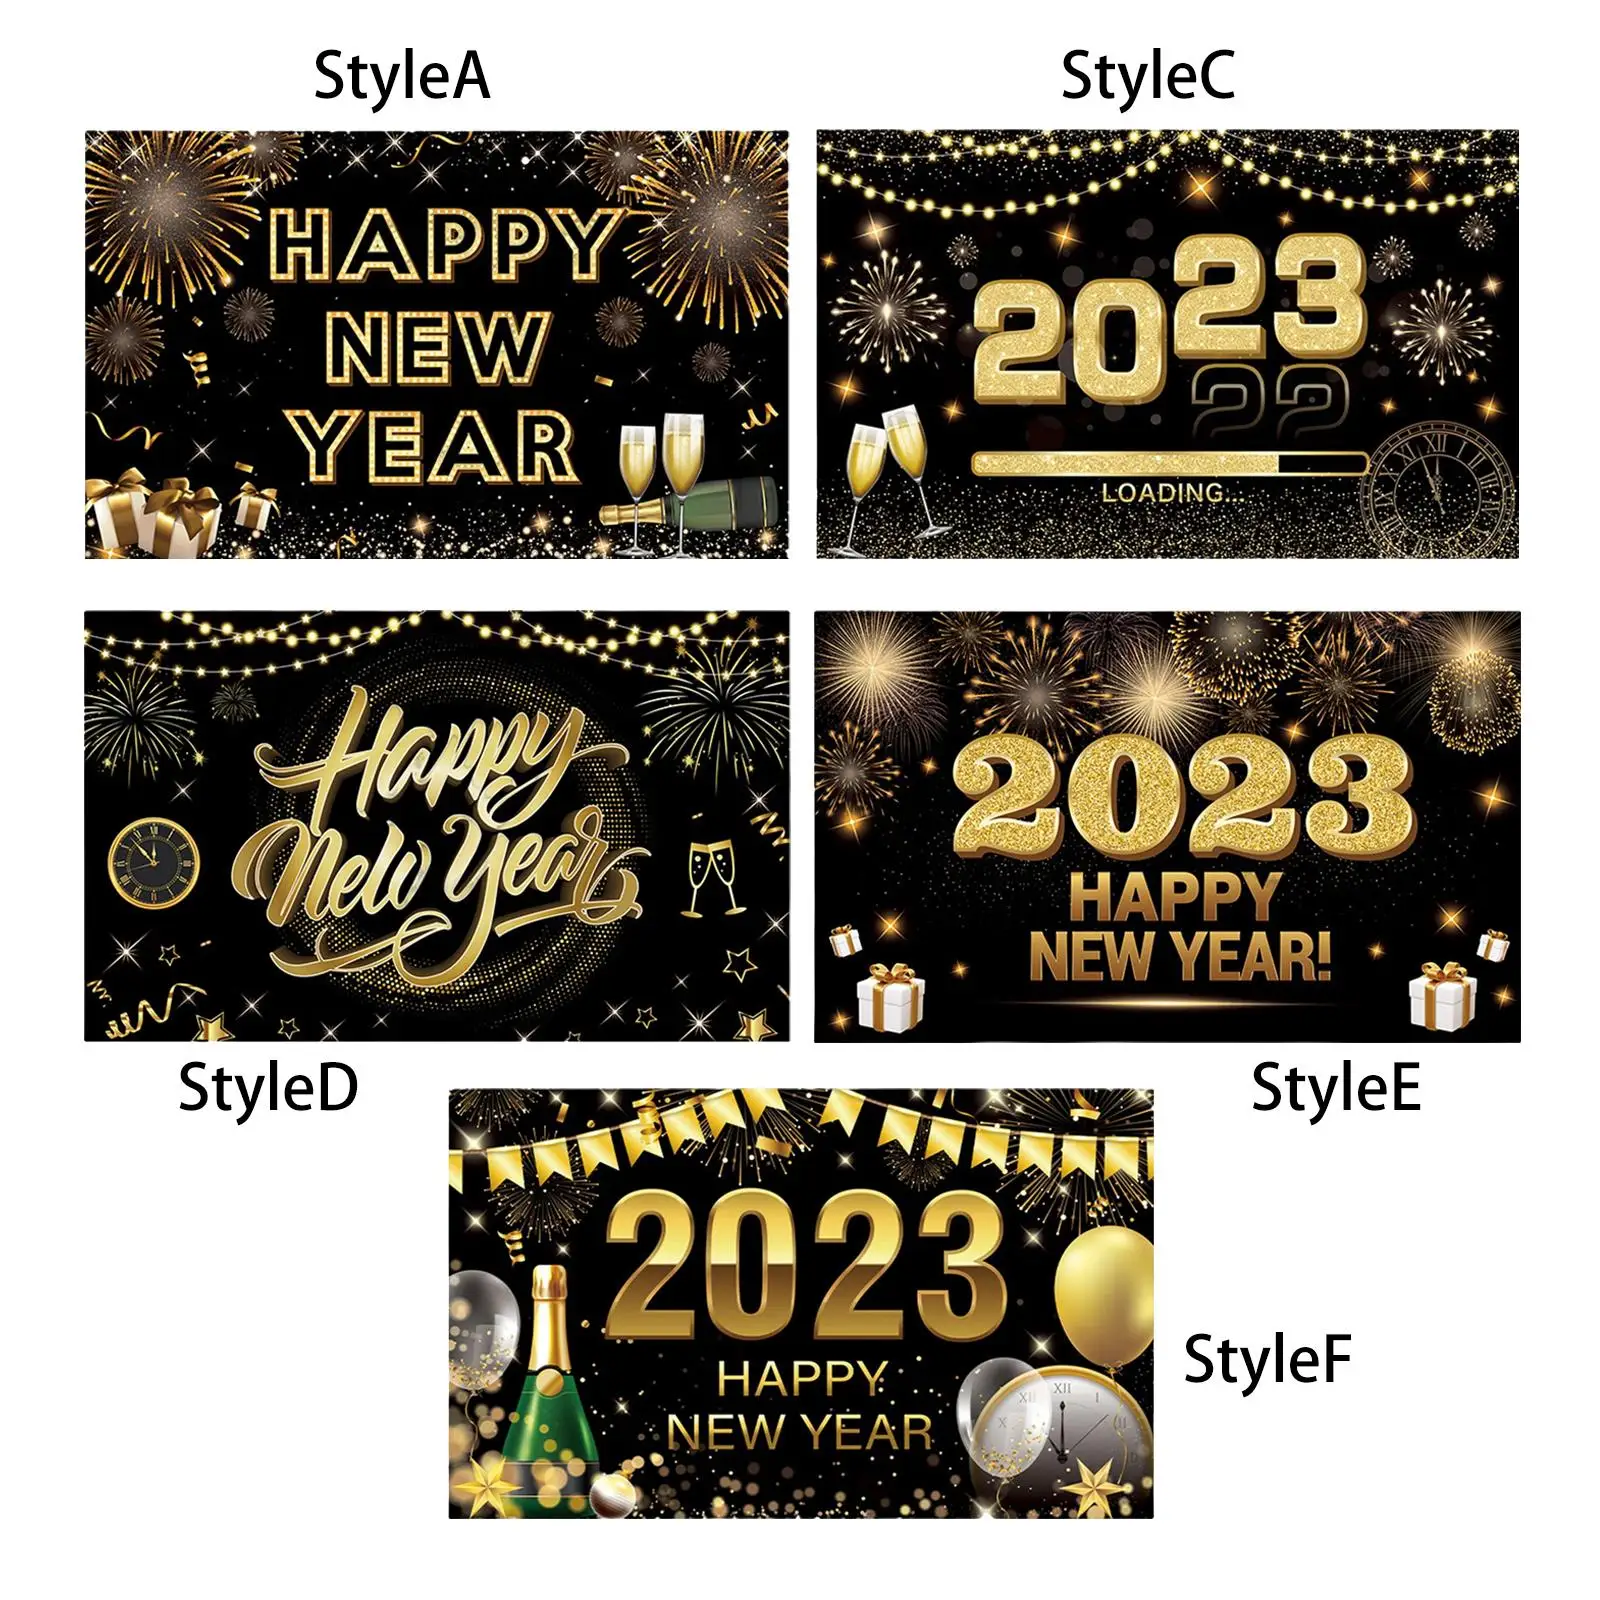 Fabric Wall Sign Poster Backdrop Home Photo Prop Decorations Holiday Bedroom Celebration Ornament Happy New Year Banner 2023